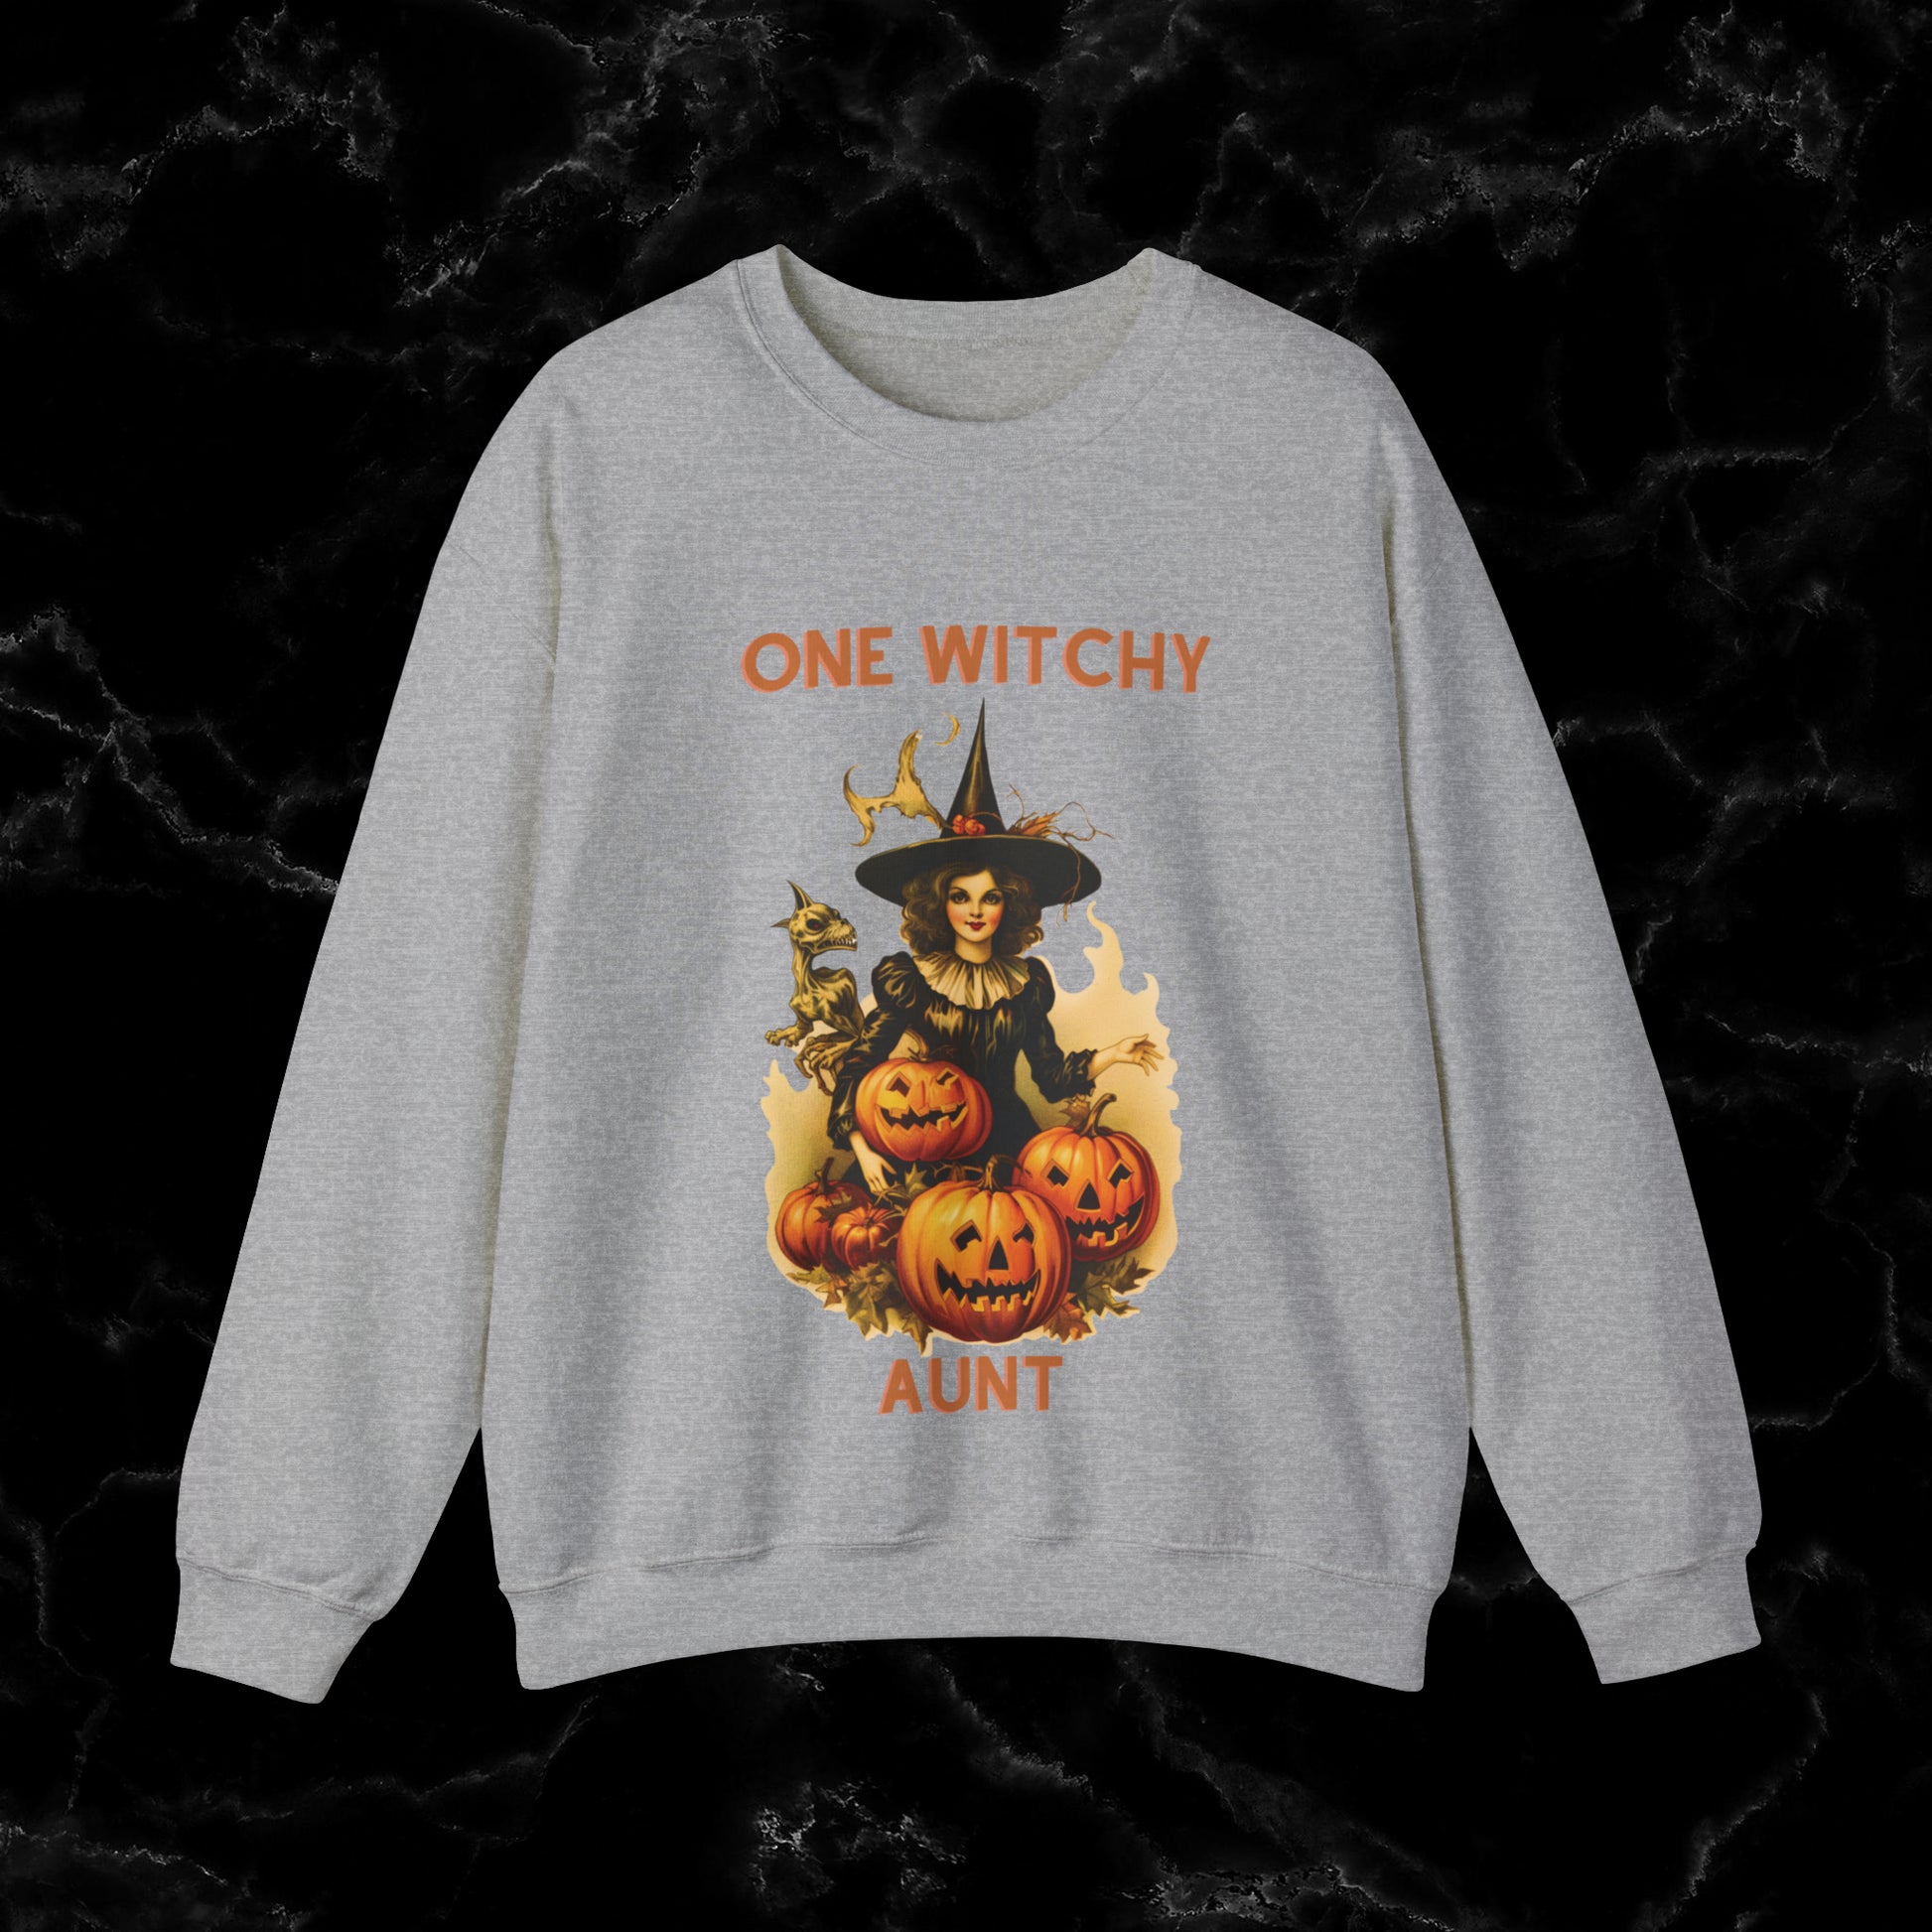 One Witchy Aunt Sweatshirt - Cool Aunt Shirt, Feral Aunt Sweatshirt, Perfect Gifts for Aunts, Auntie Sweatshirt Sweatshirt S Sport Grey 